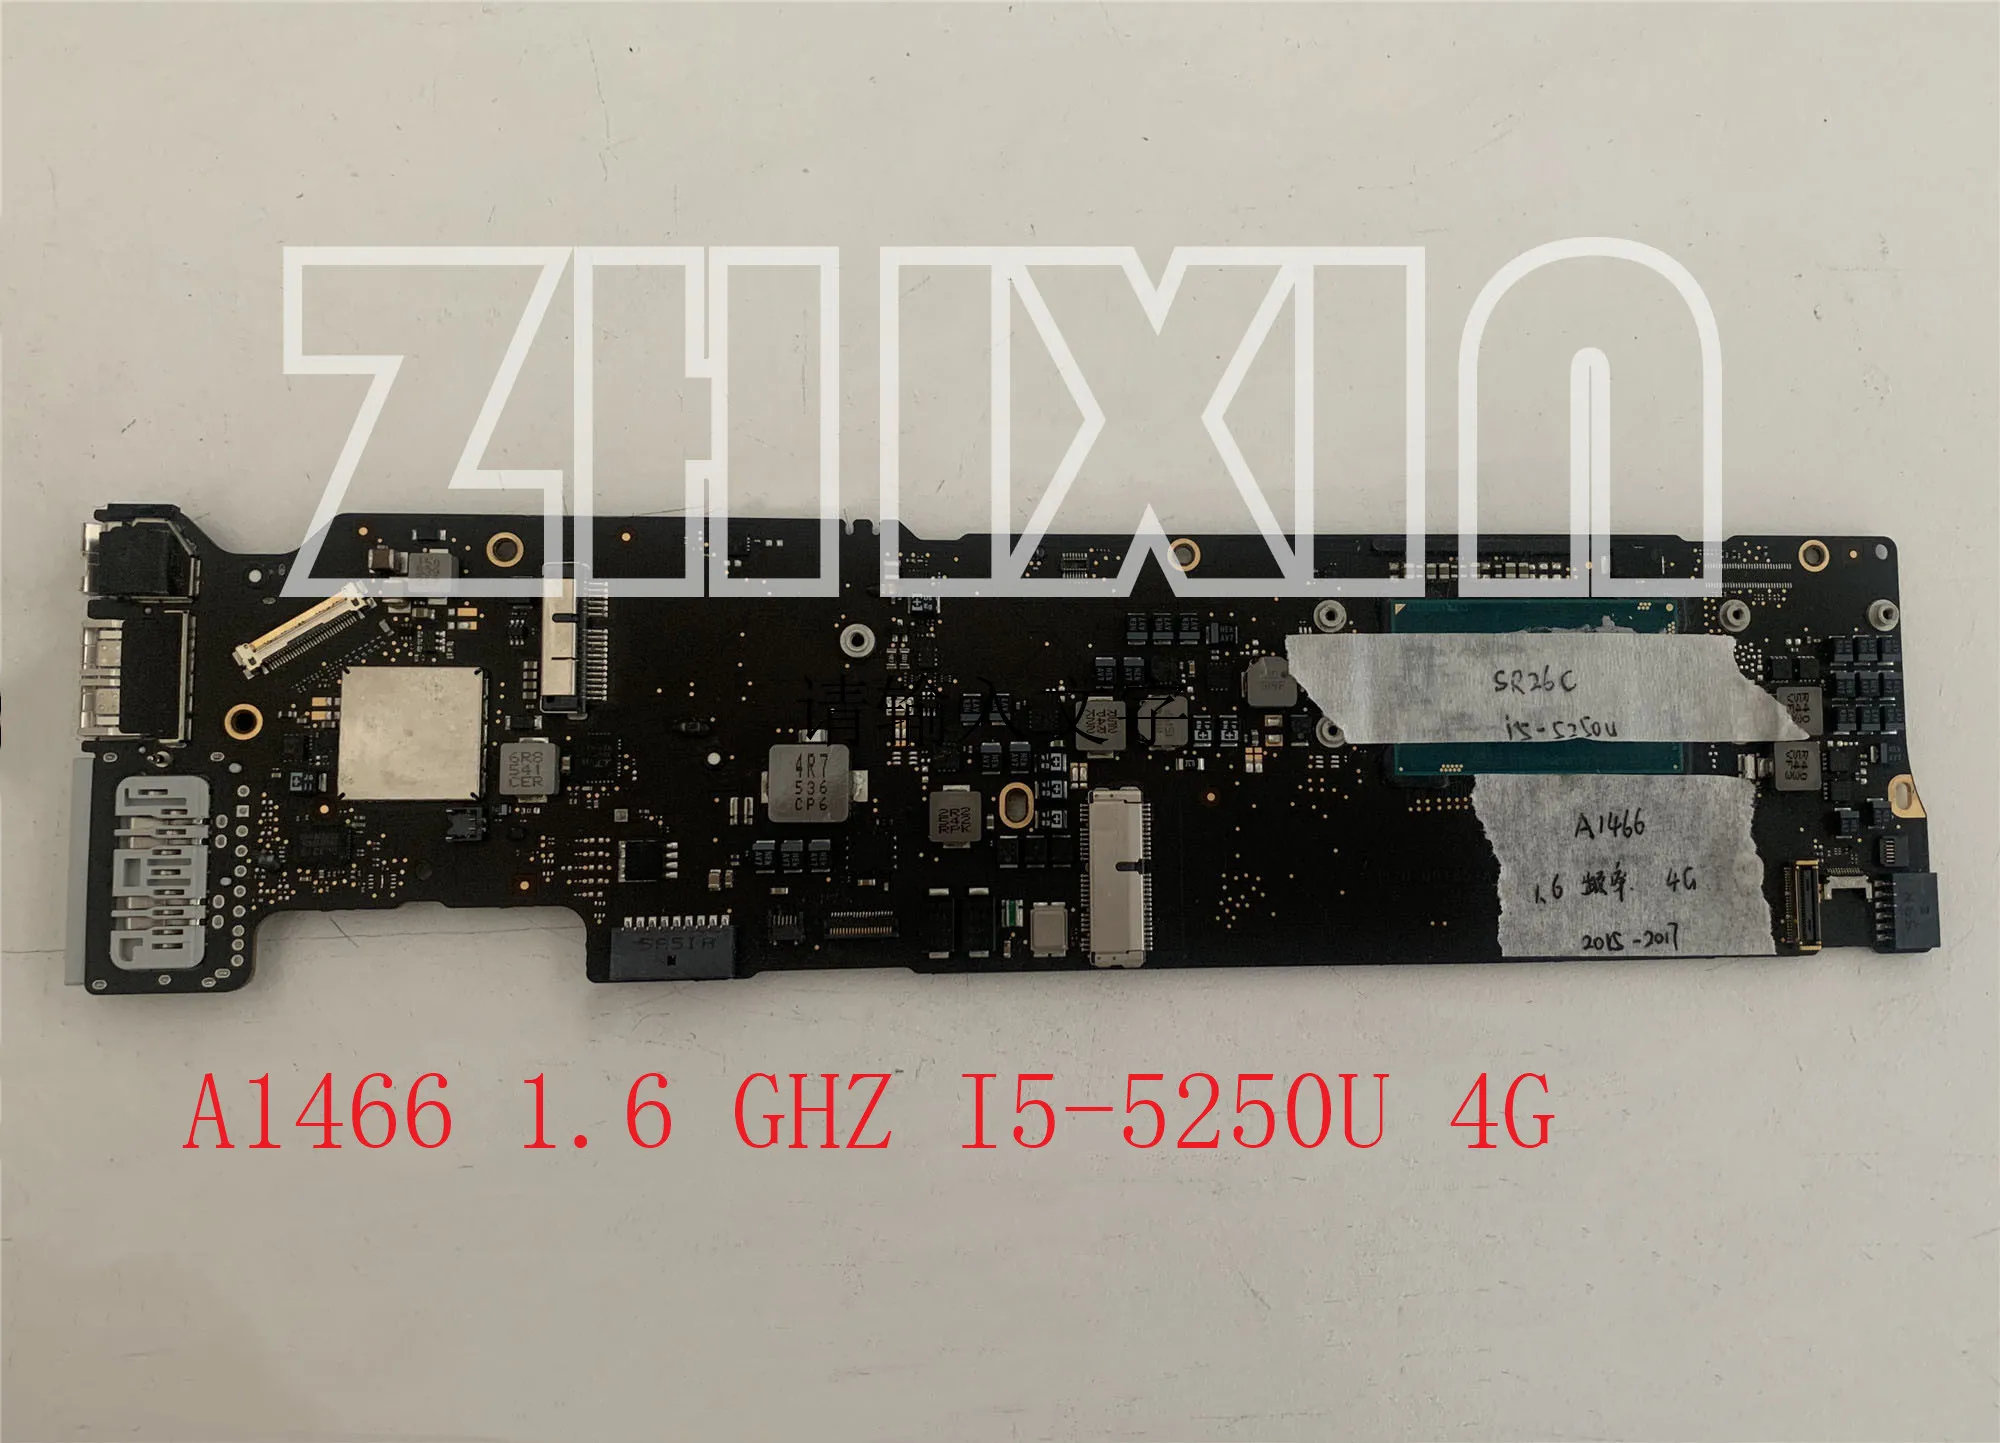 

yourui For Macbook Air A1466 motherboard 13.3" 1466 4GB Logic Board i5 1.6GHz 4G 661-02391 820-00165-A mainboard 2015-2017 year